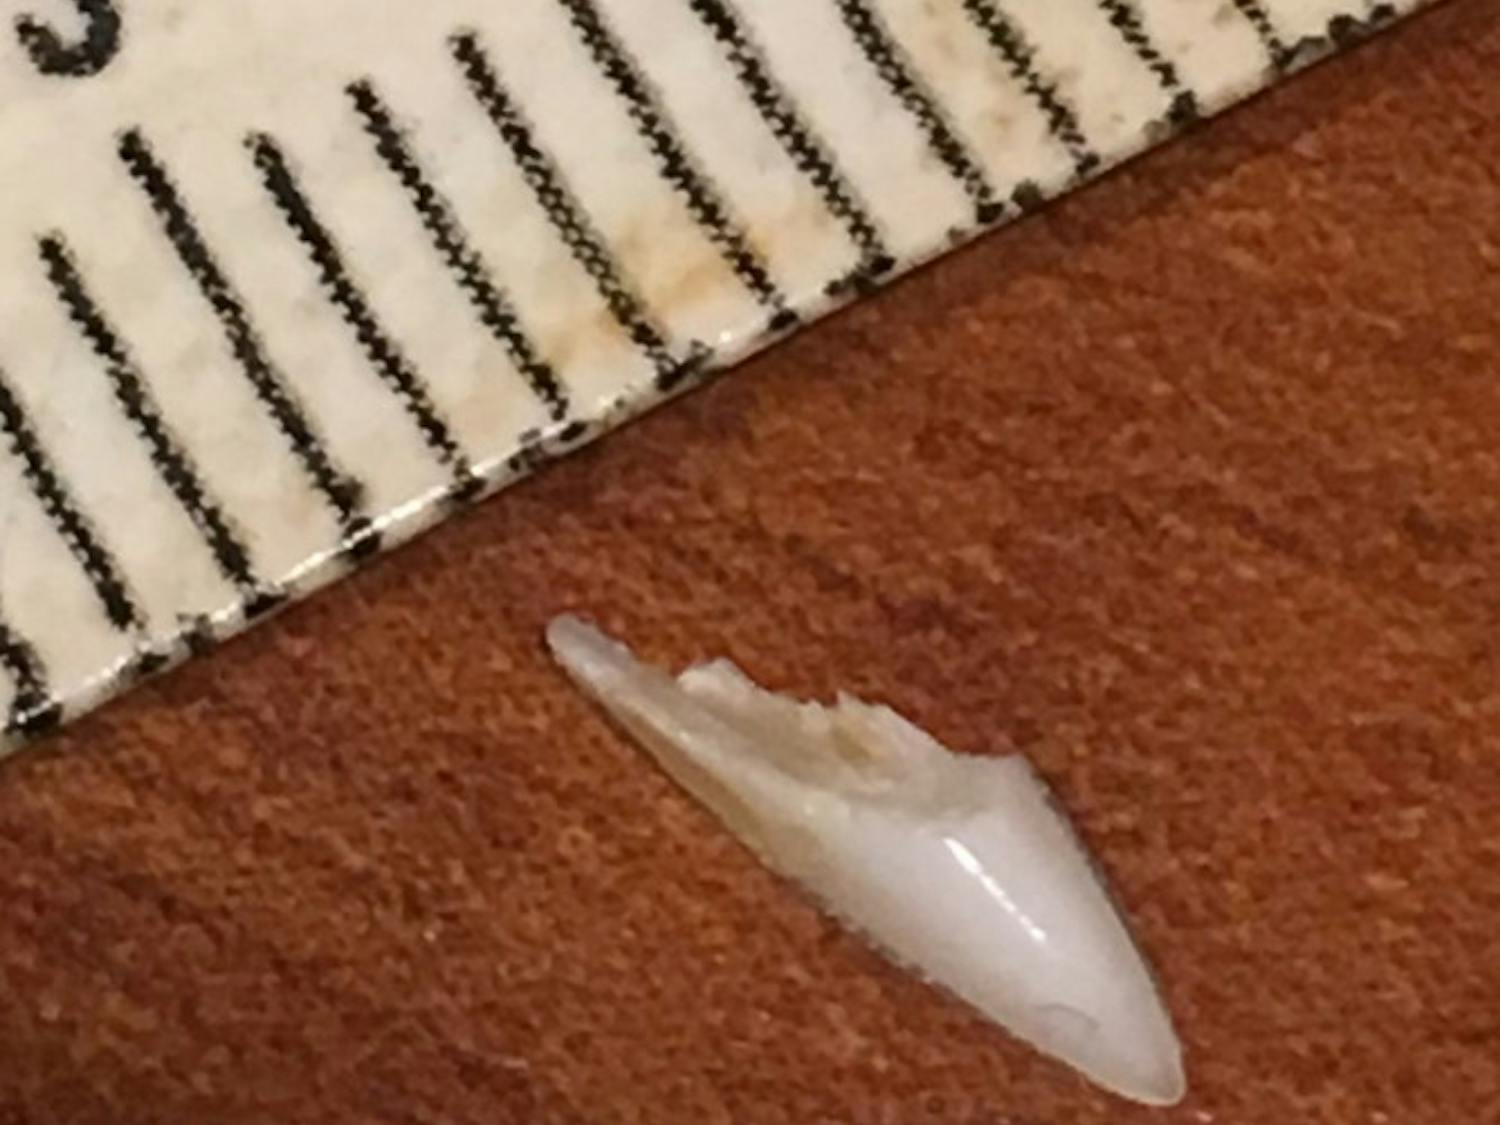 The tooth he removed from his foot in 2018 before he sent it to Gavin Naylor at FLMNH. The tooth was measured at a half centimeter long.